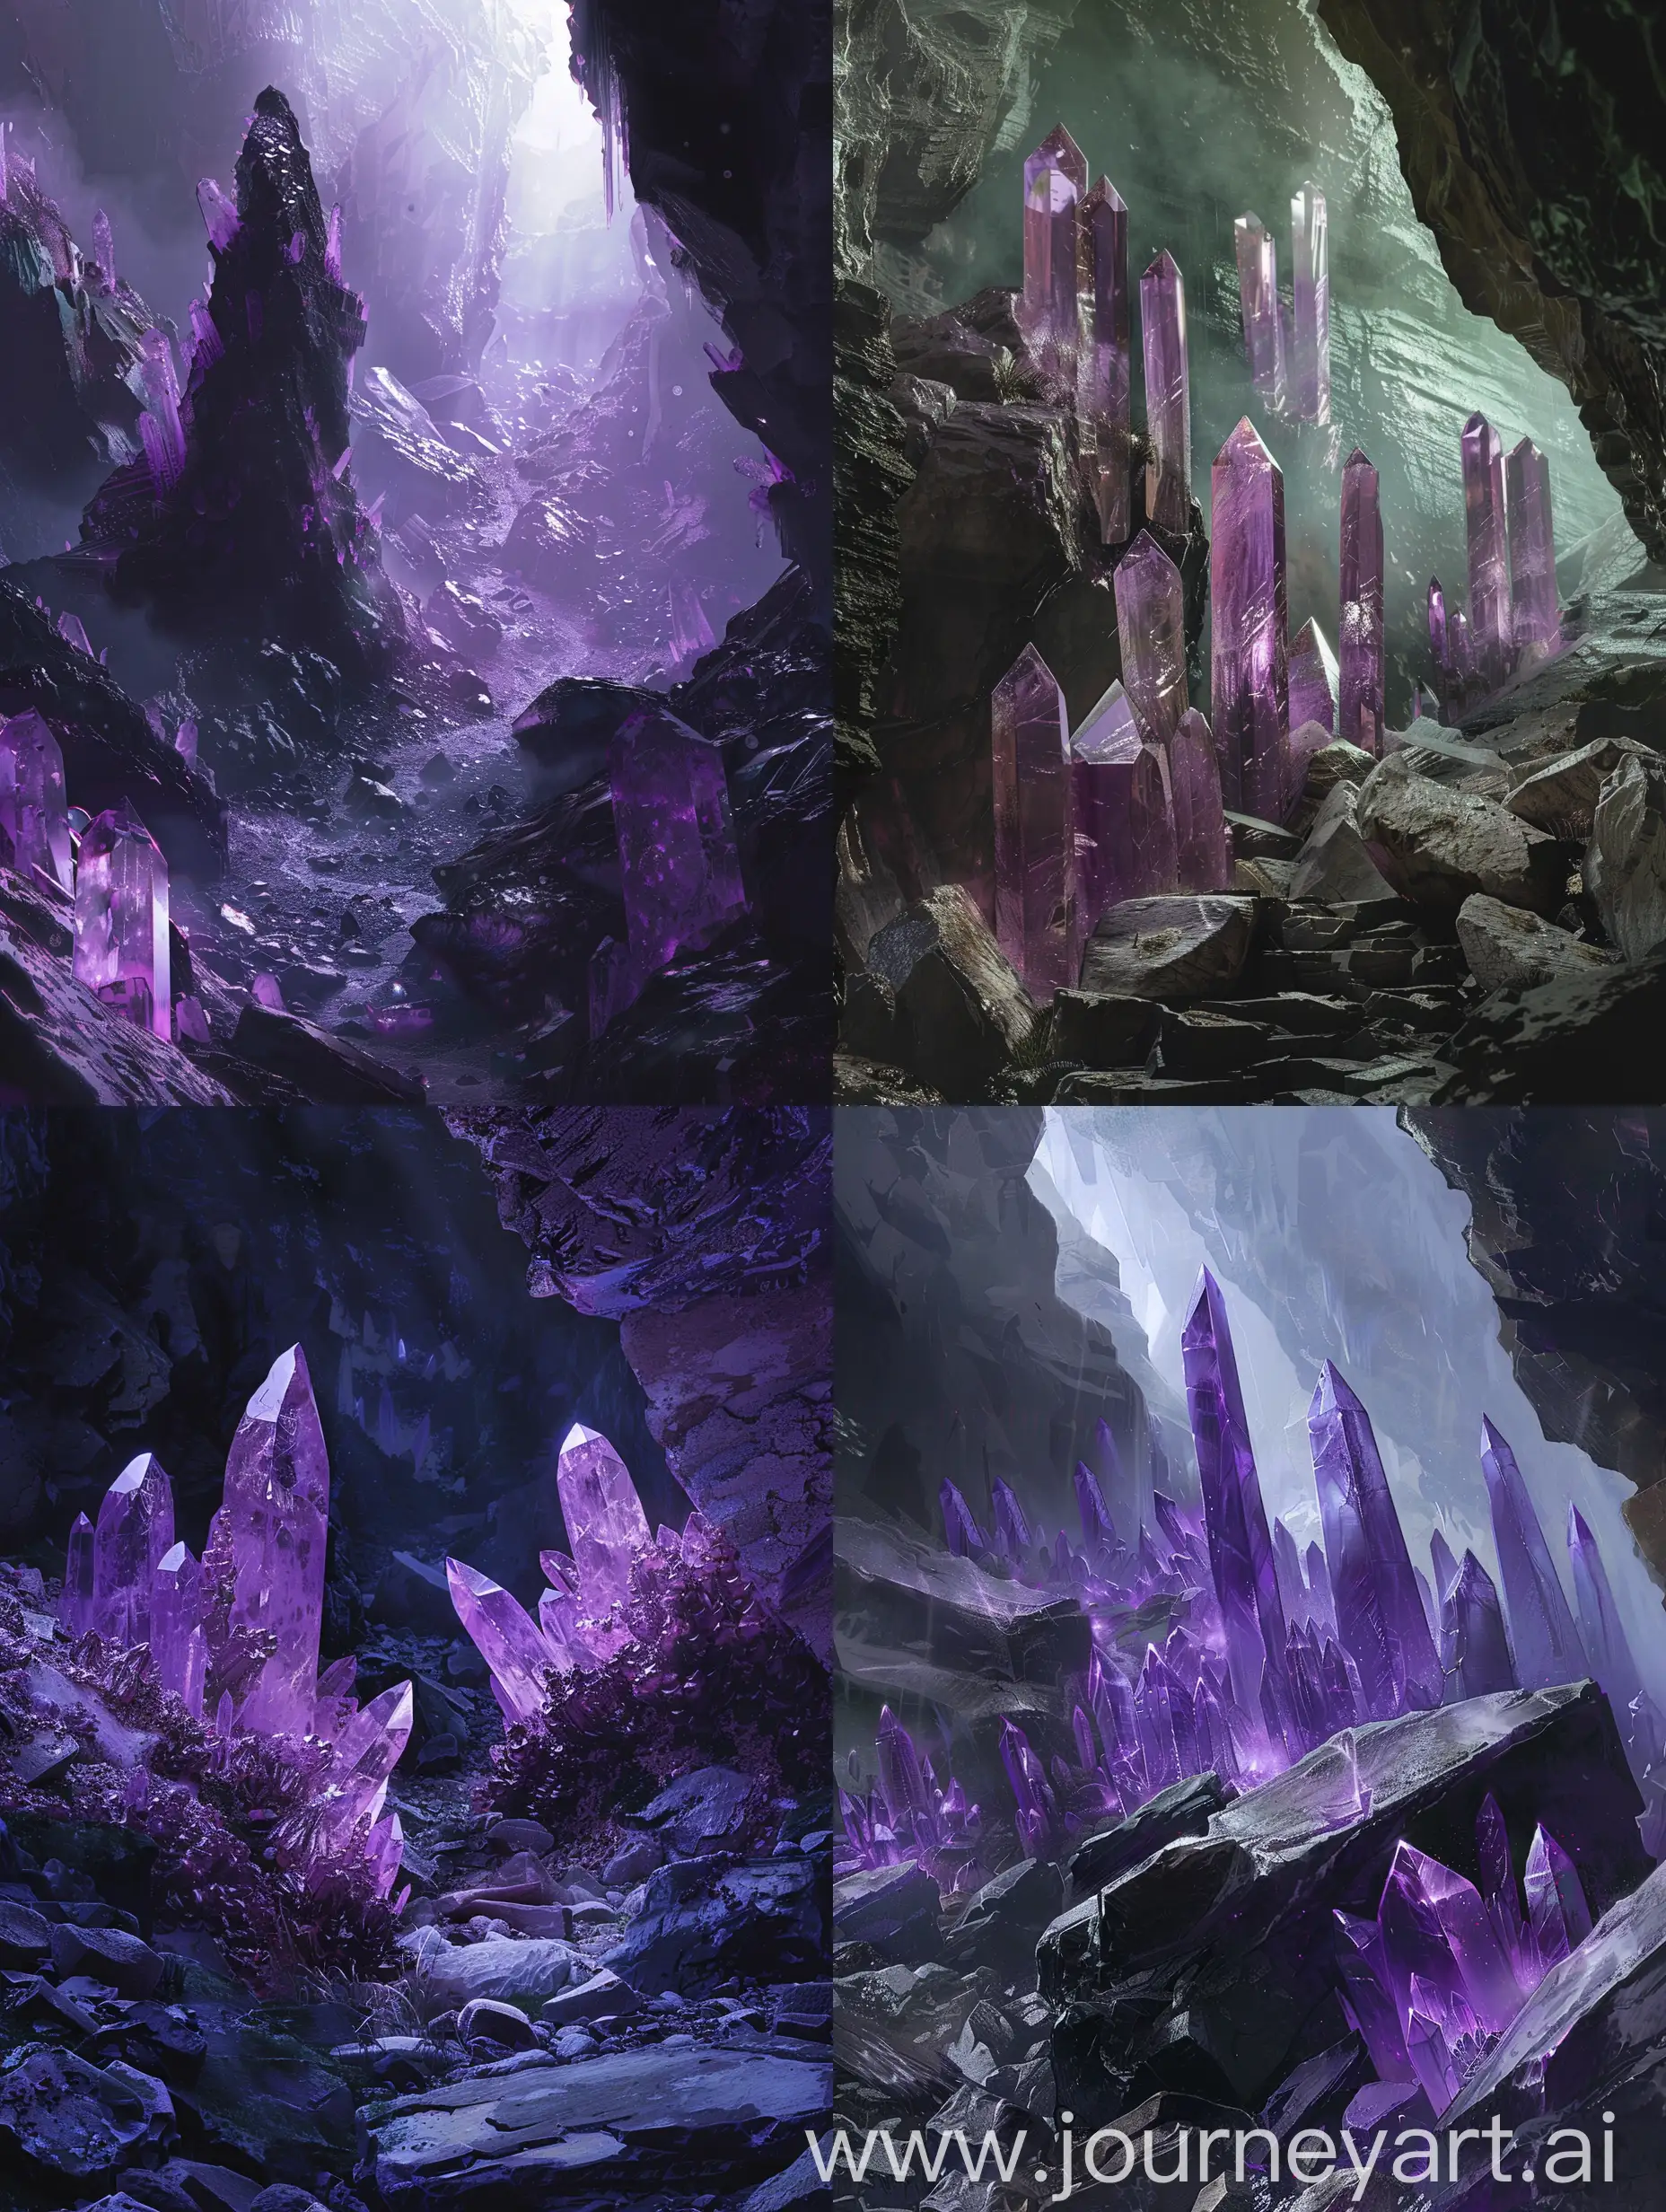 gloomy rocks from which purple crystals grow